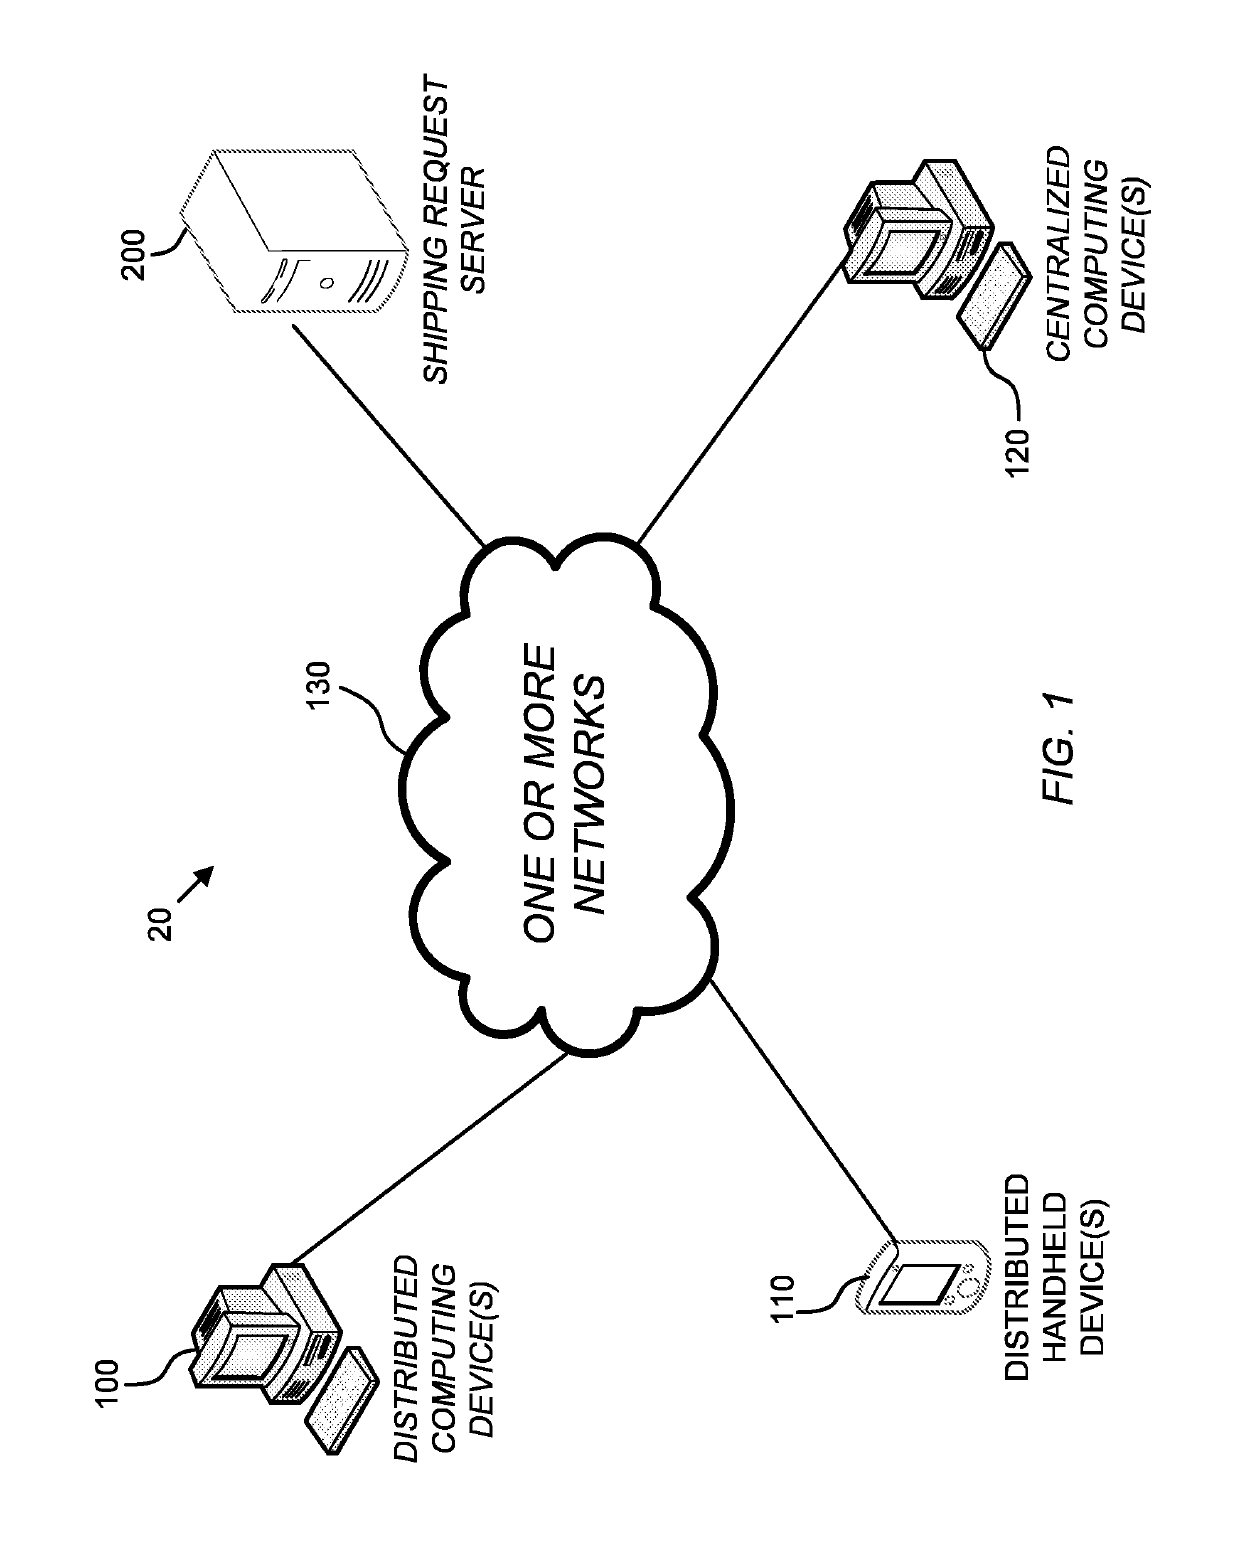 Systems, methods, and computer program products for a shipping application having an automated trigger term tool